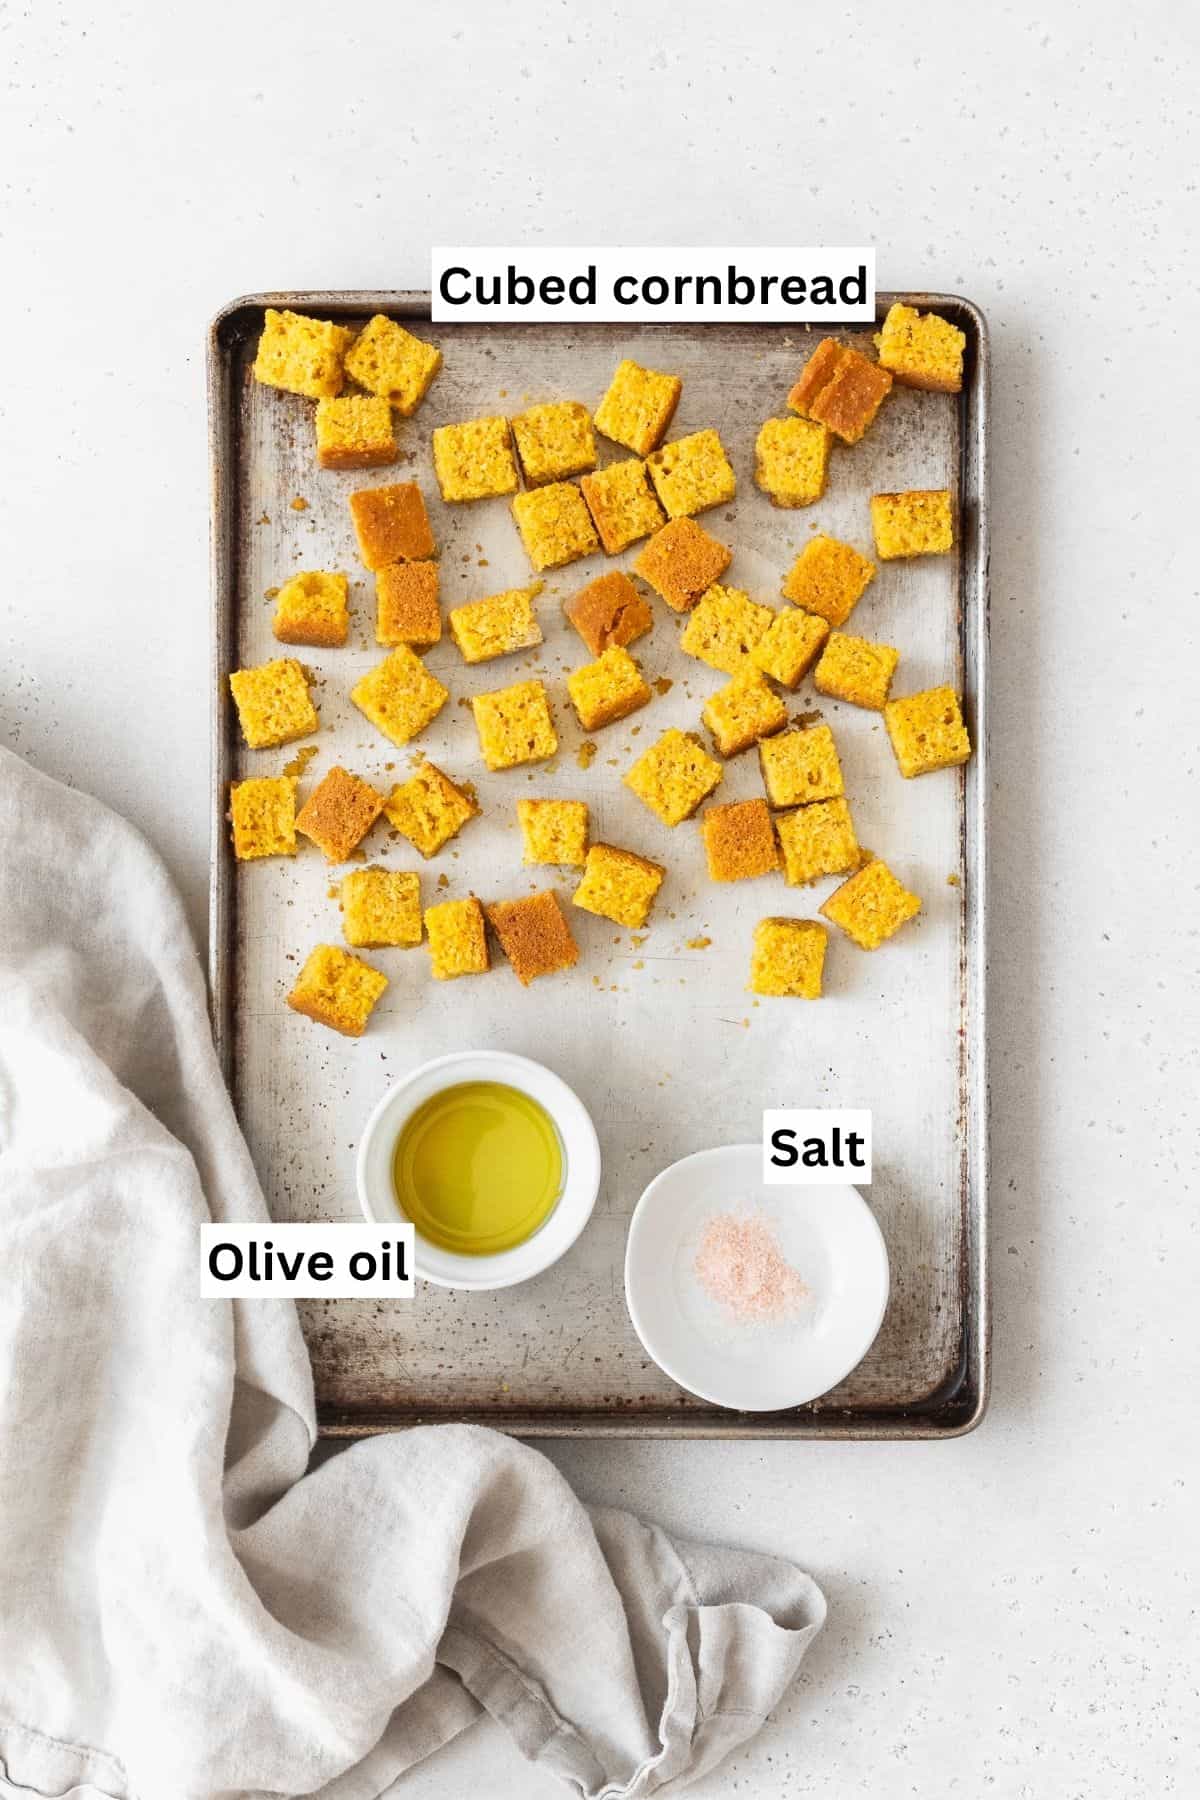 A baking sheet with cubed cornbread, olive oil, and salt.